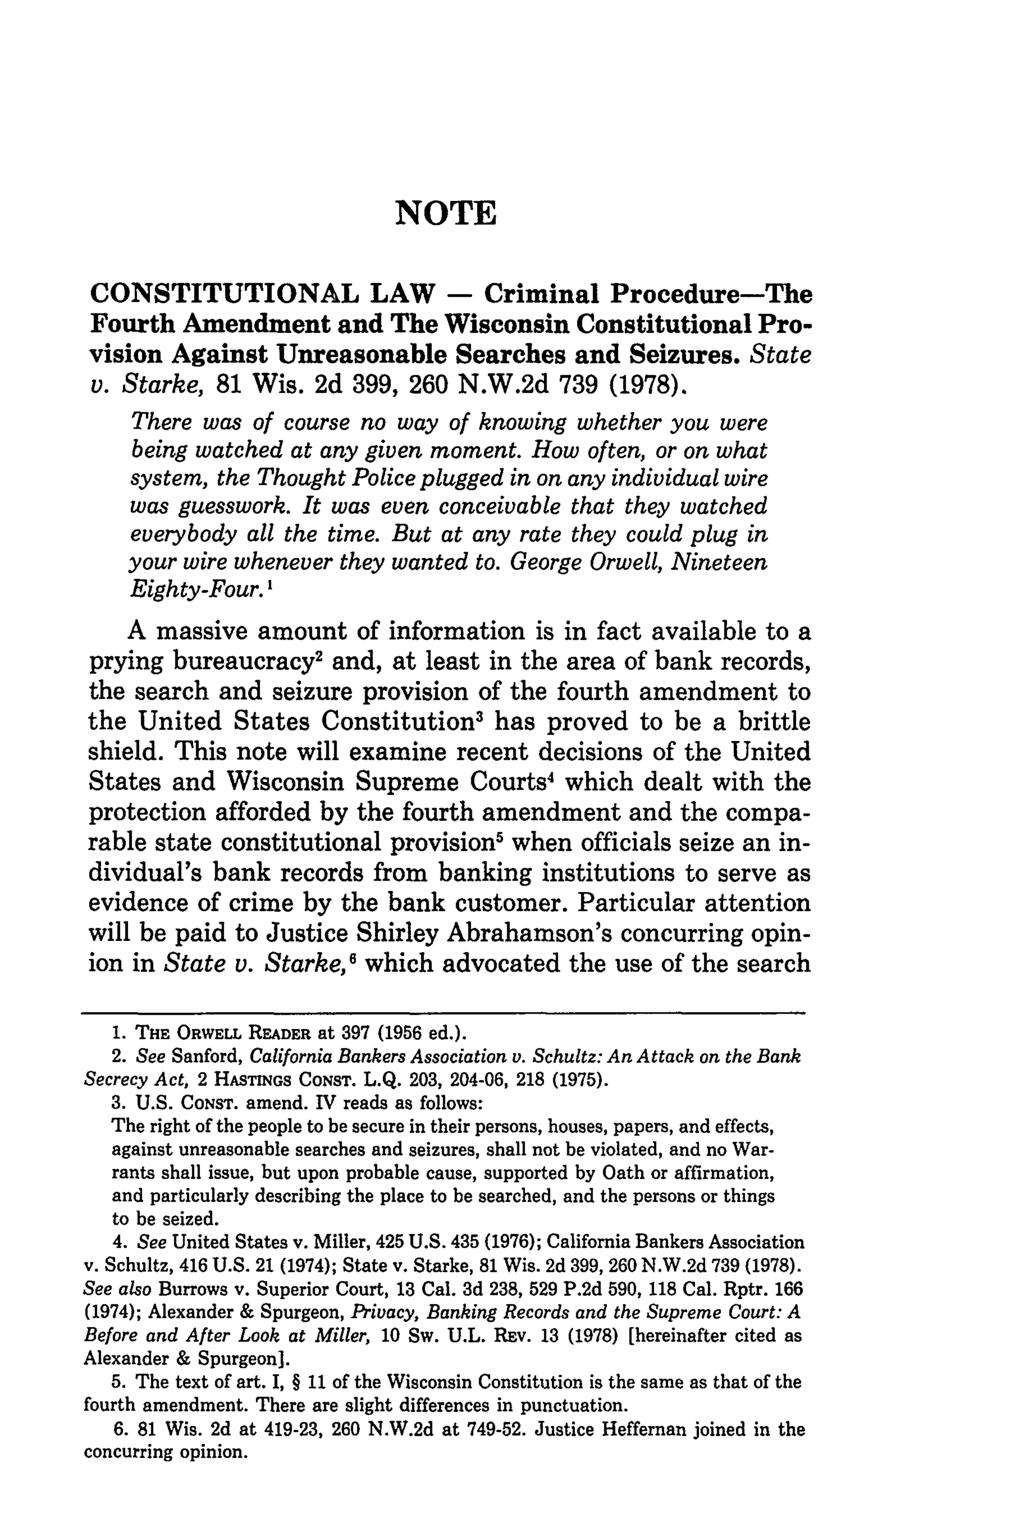 NOTE CONSTITUTIONAL LAW - Criminal Procedure-The Fourth Amendment and The Wisconsin Constitutional Provision Against Unreasonable Searches and Seizures. State v. Starke, 81 Wis. 2d 399, 260 N.W.2d 739 (1978).